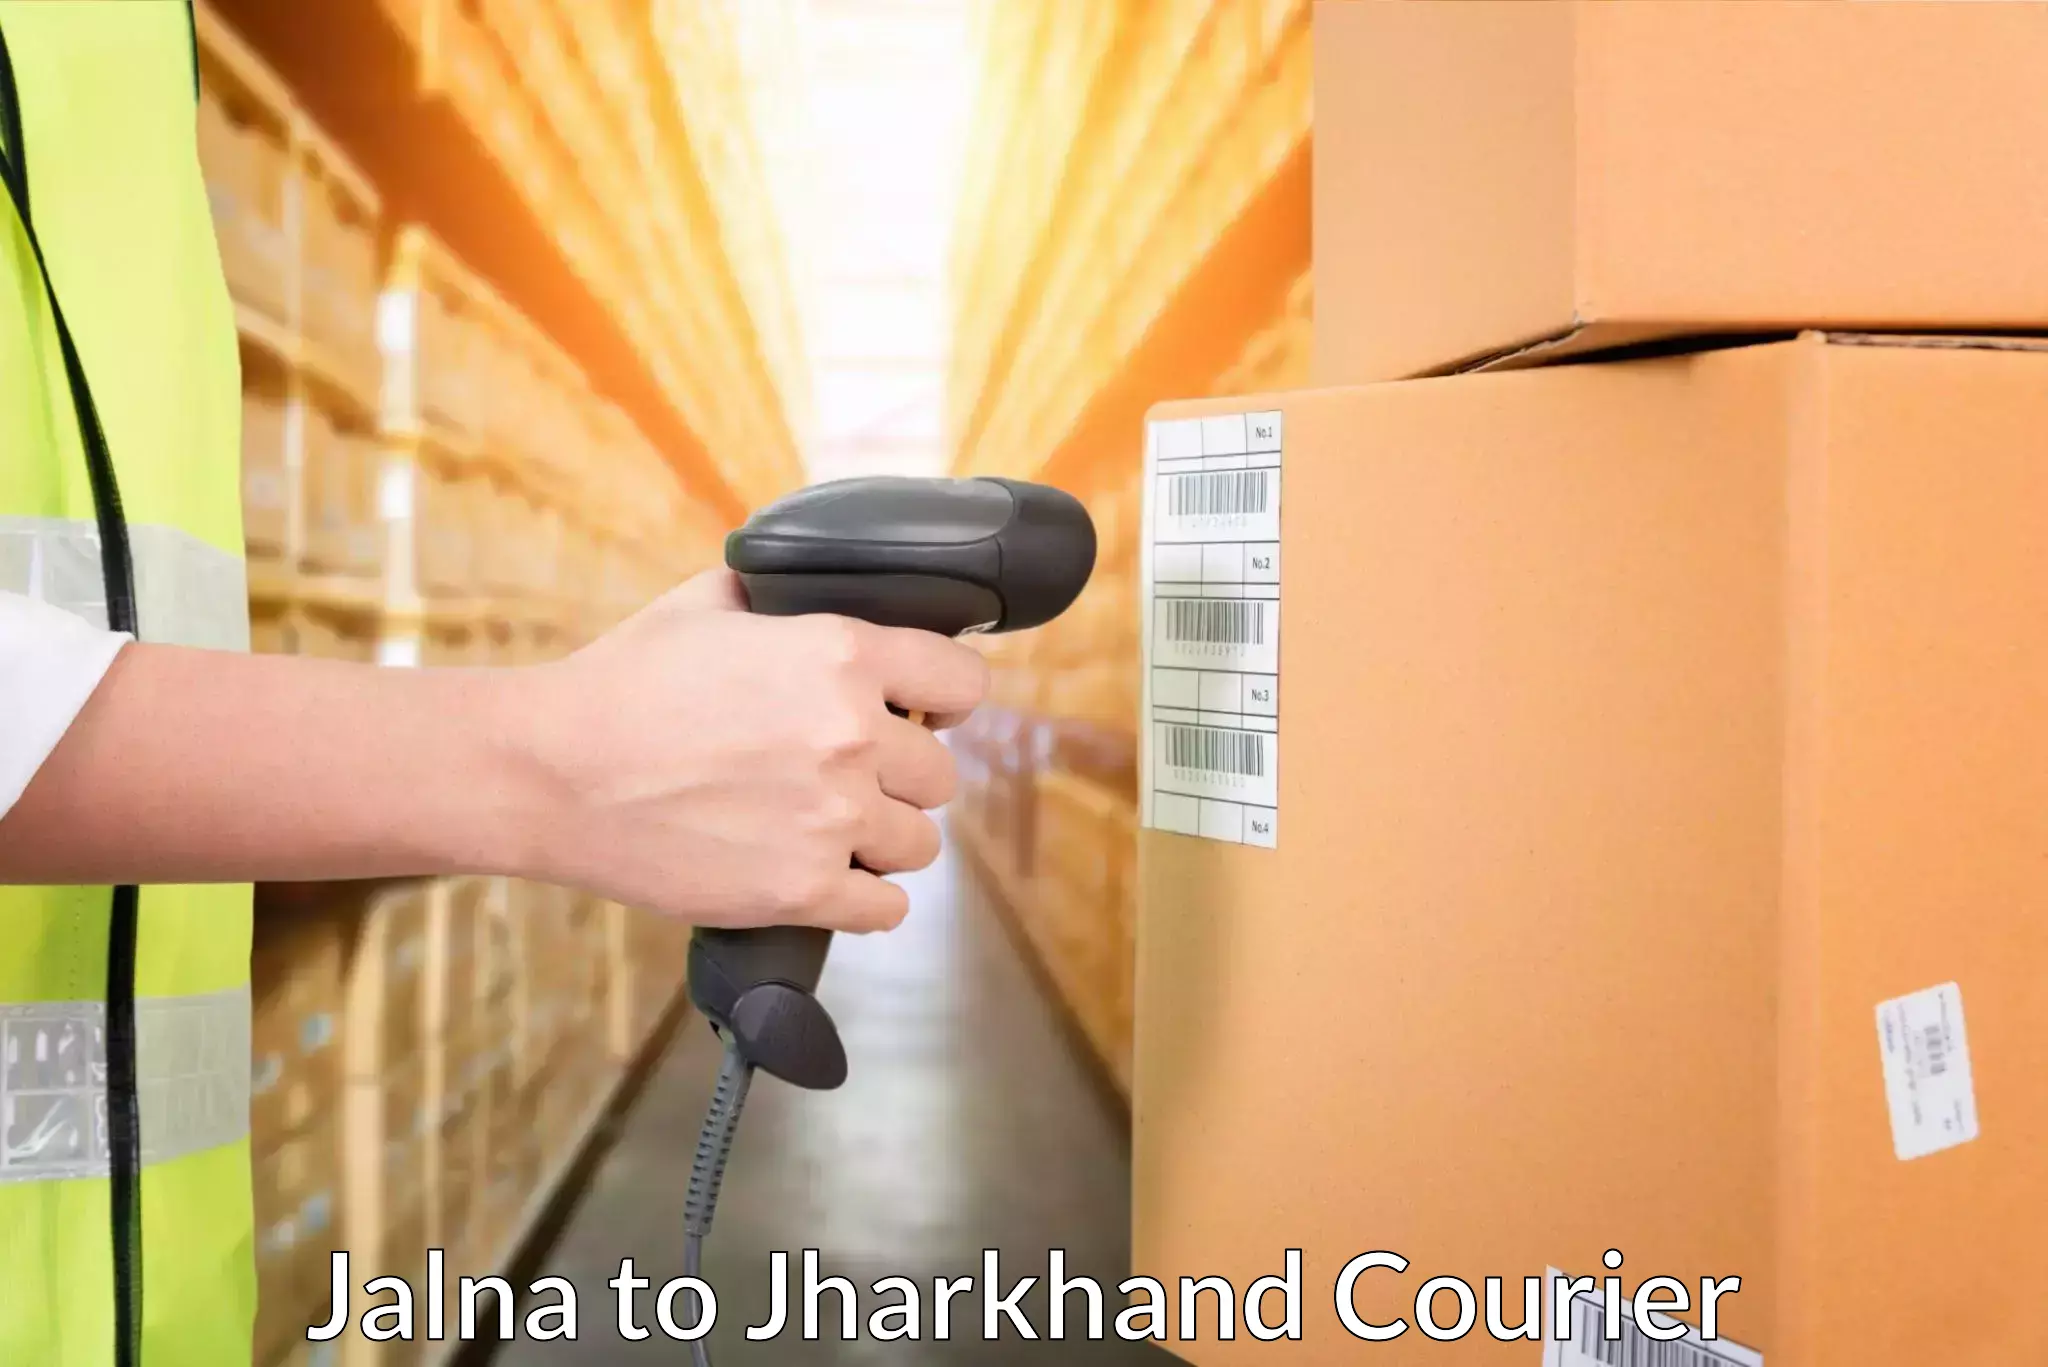 Reliable courier service Jalna to Jharkhand